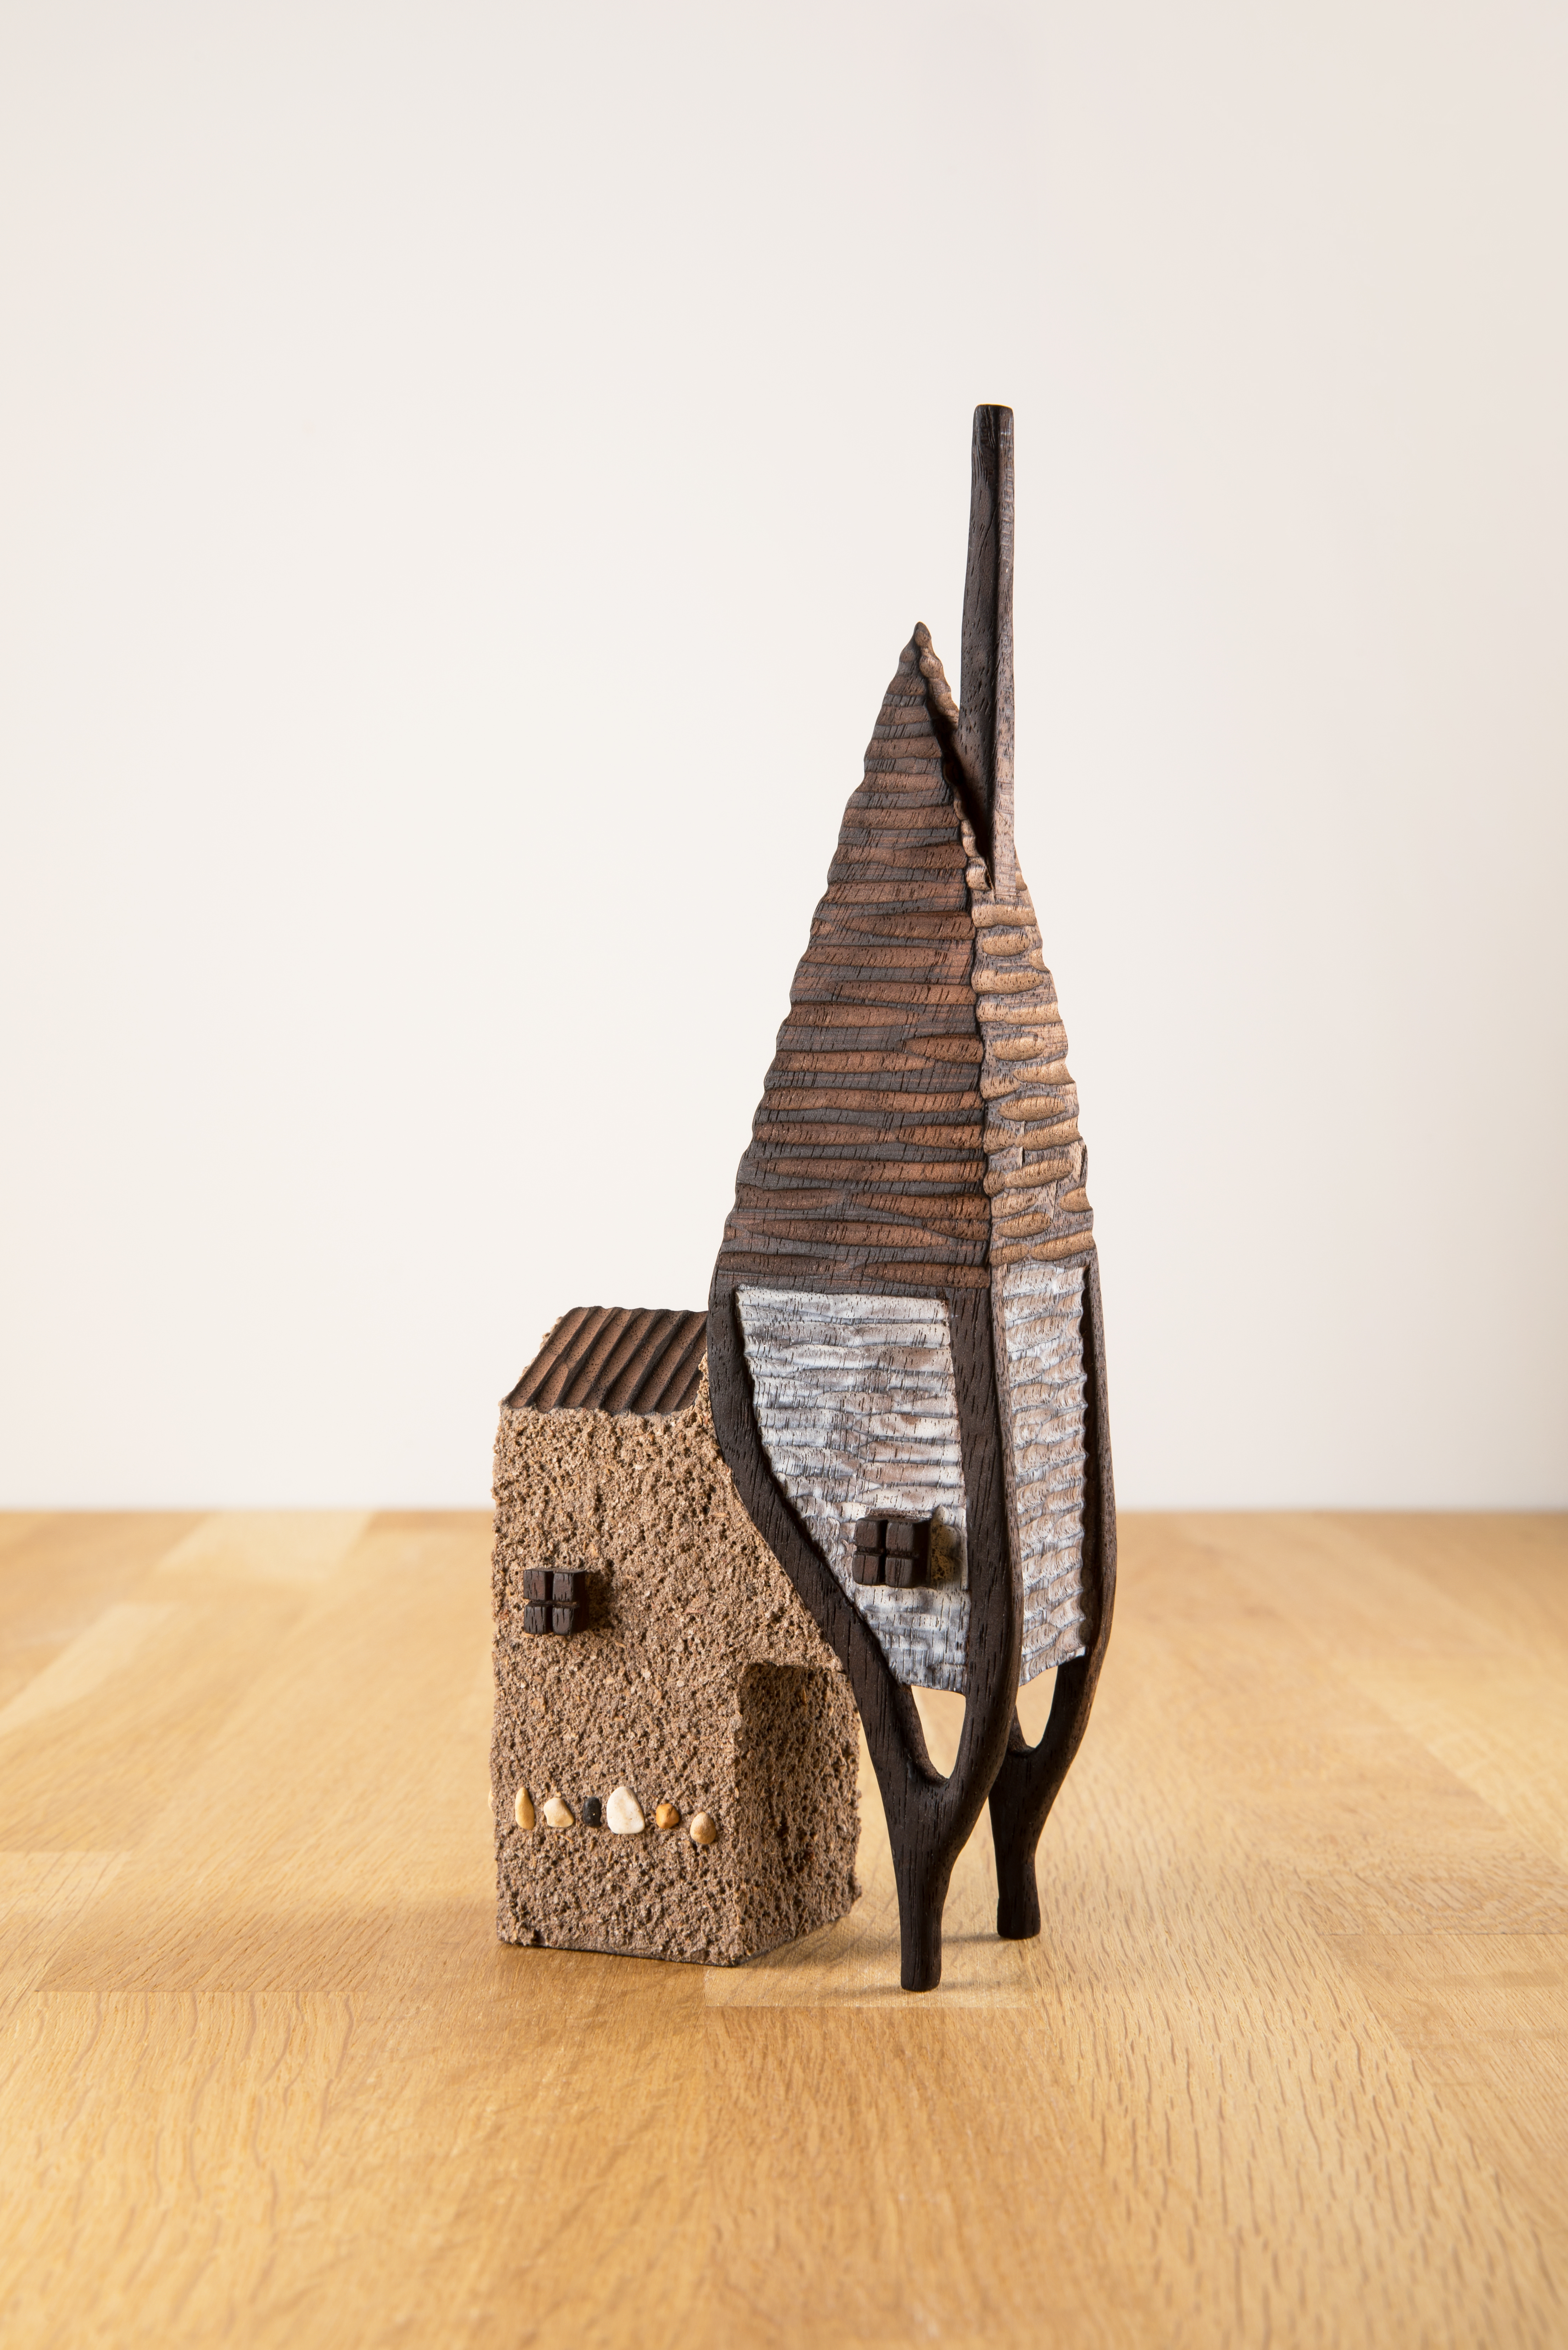 A miniature carved wooden house, with tall chimney